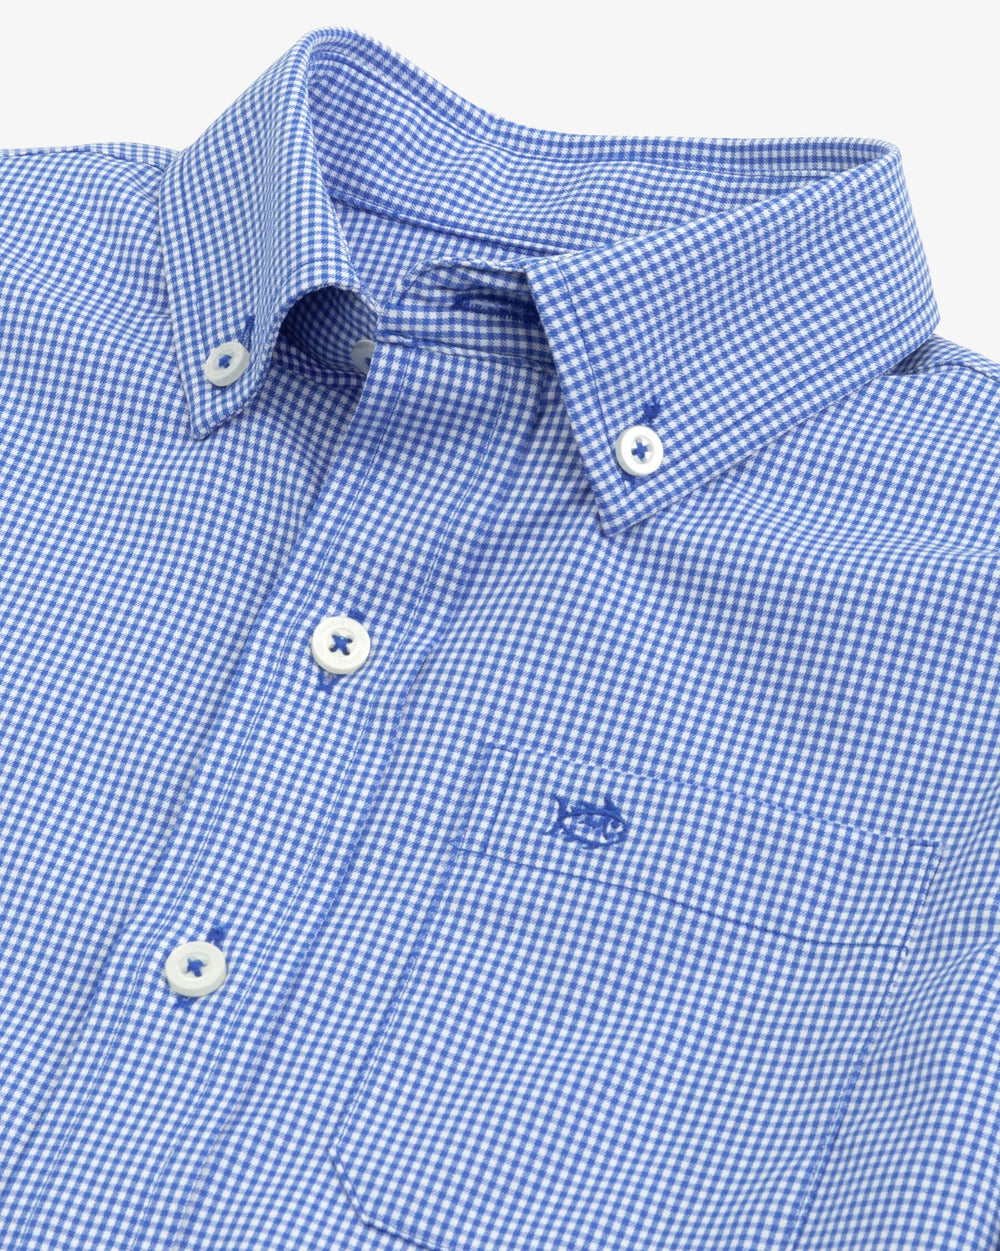 The detail view of the Southern Tide Boys mini gingham intercoastal buttn down shirt by Southern Tide - Cobalt Blue